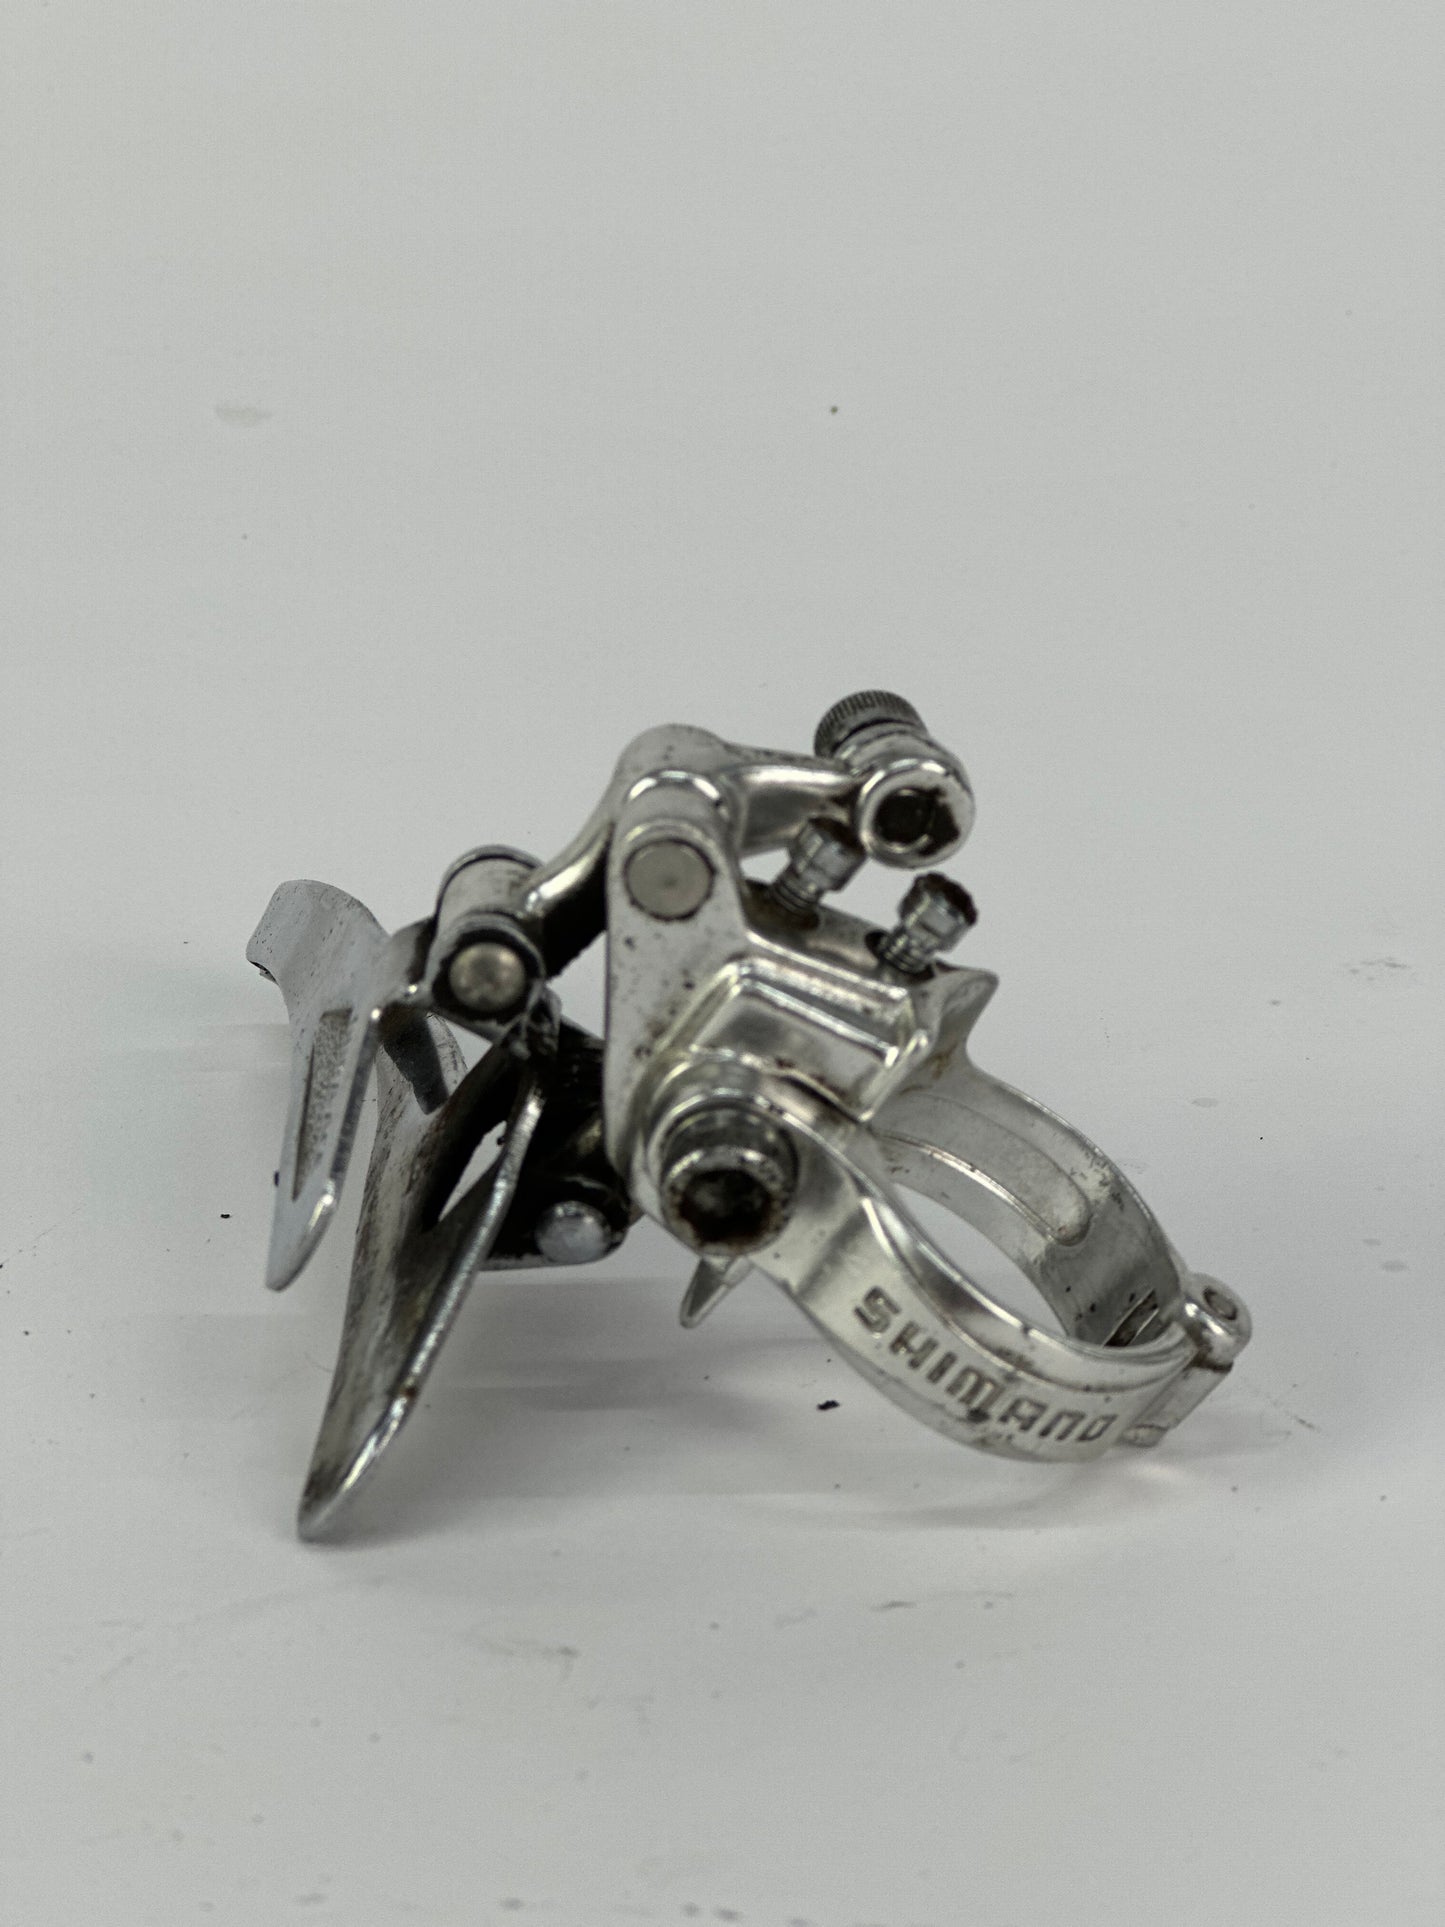 Shimano Dura Ace front derailleur double clamp-on